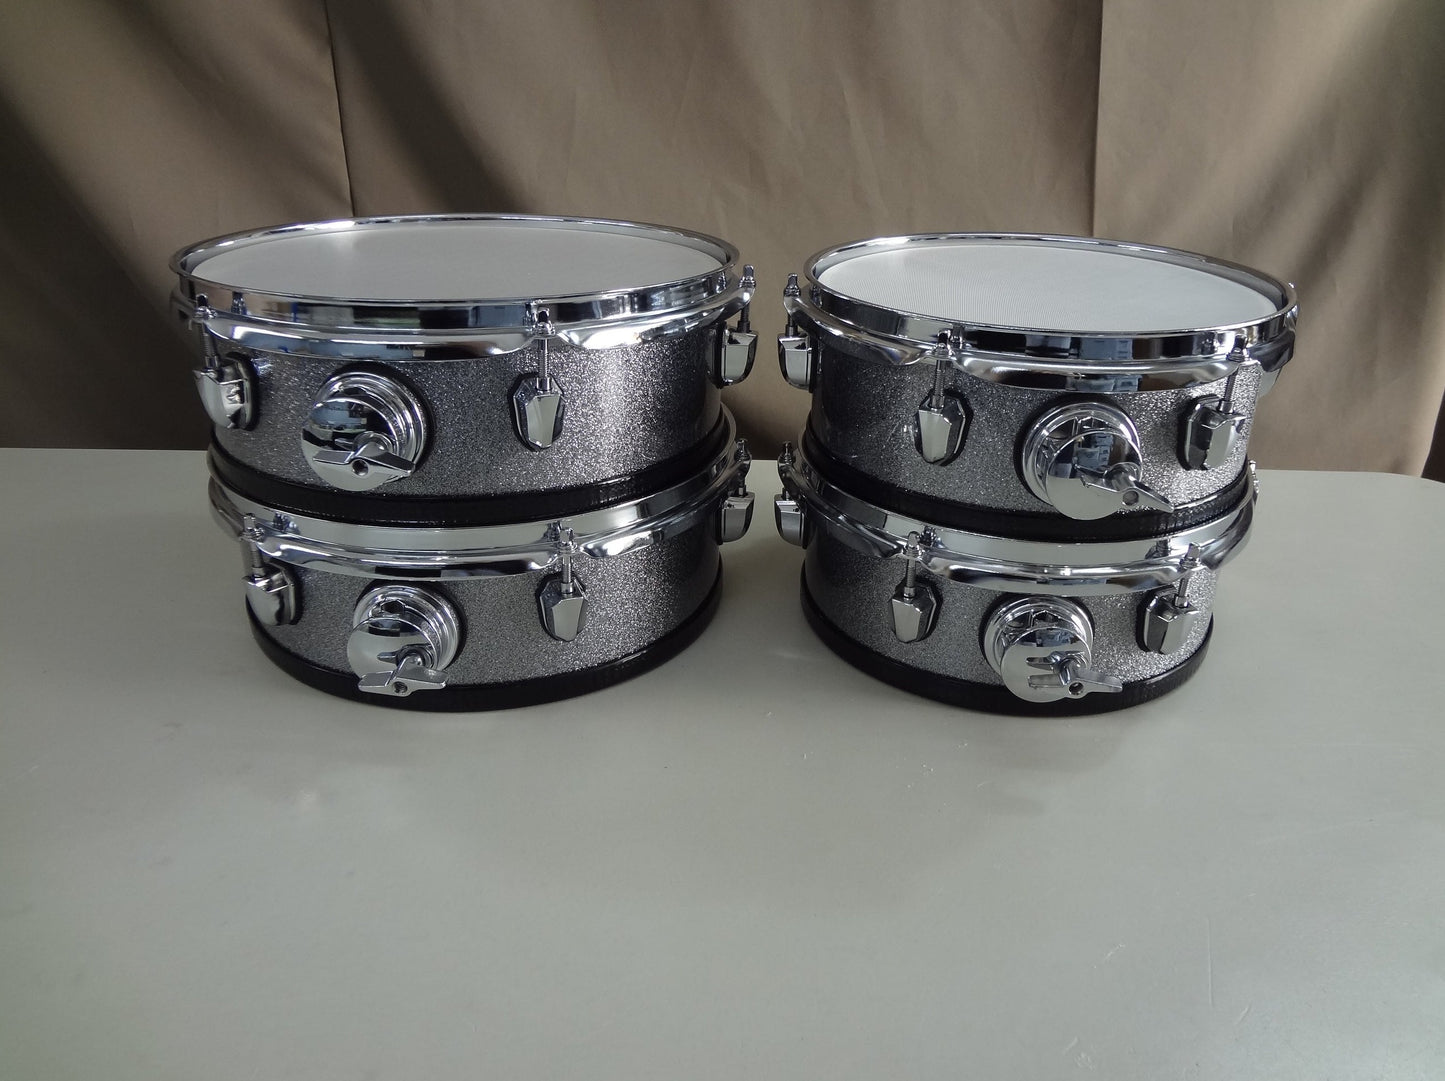 5 Piece Custom Built Electronic Drum Kit with Cymbals, Rack and Module.